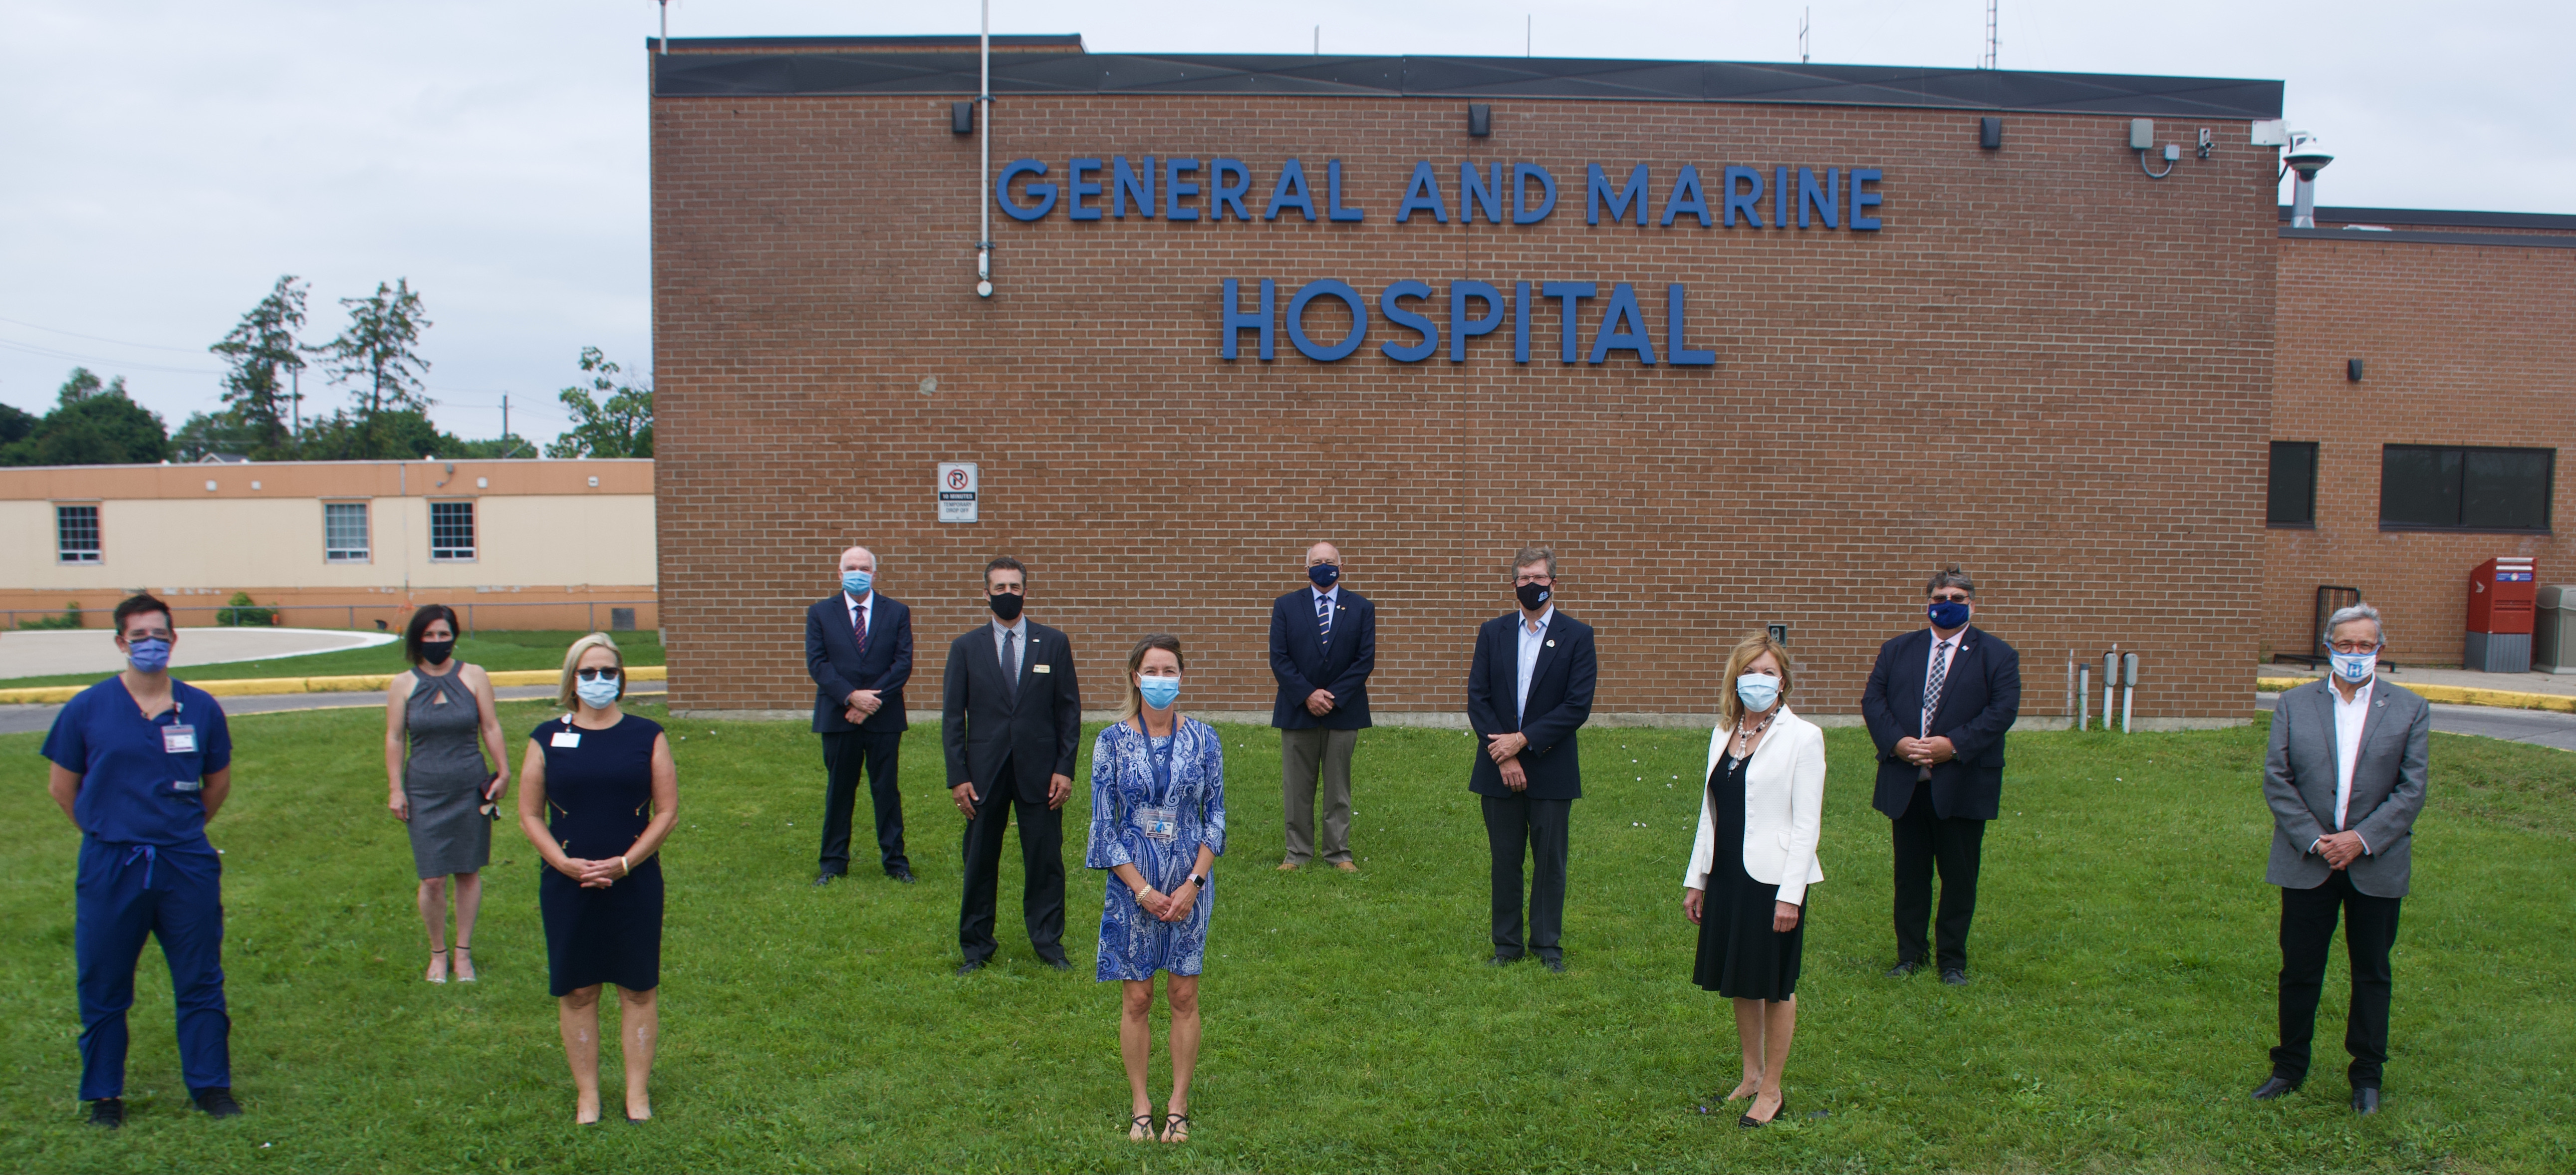 Picture of multiple South Georgian Bay mayors and council members along with senior members at CGMH, standing in front of CGMH building on grass.